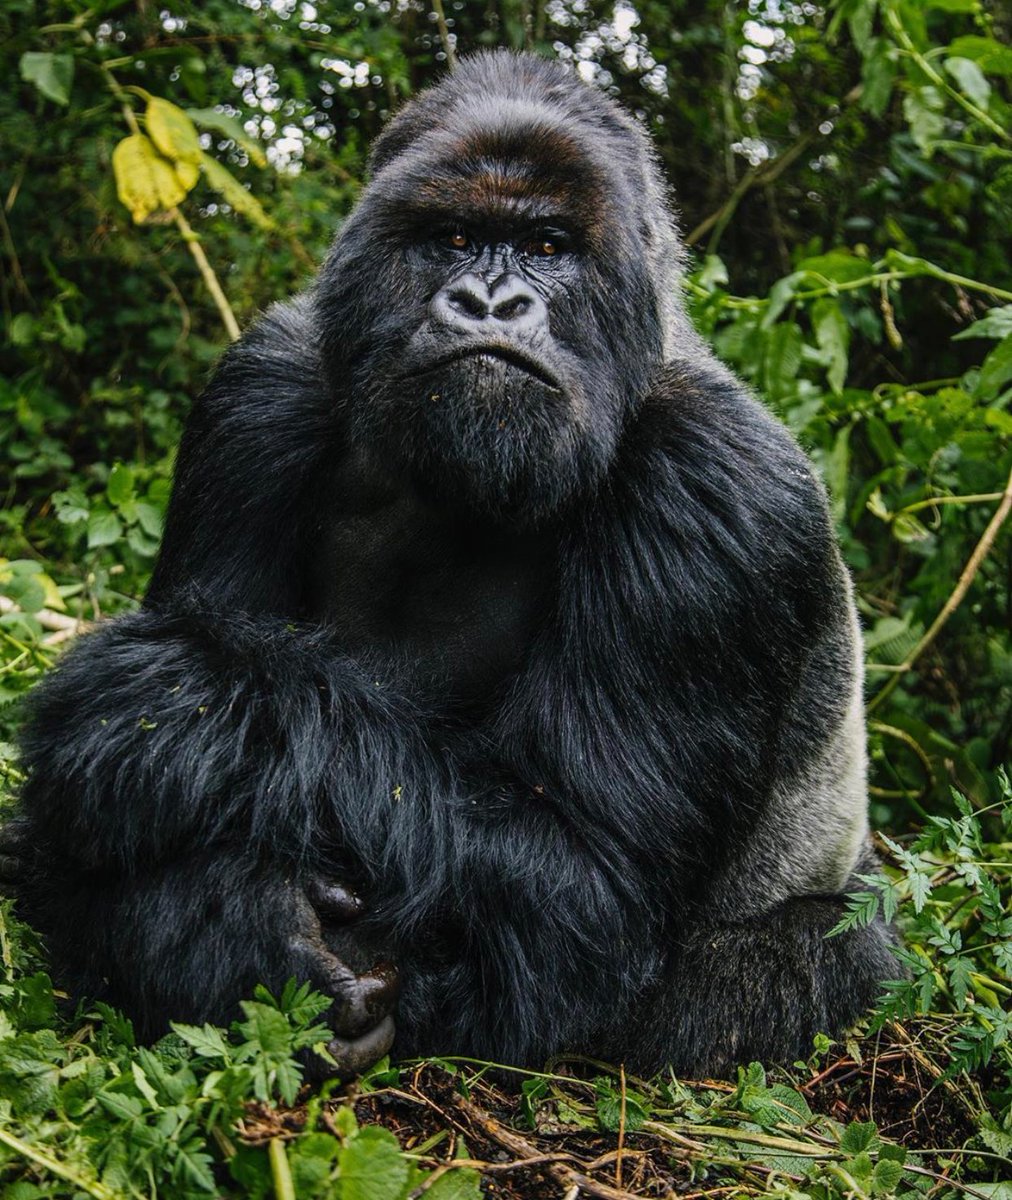 Space for Giants worked with @Ugwildlife and @TourismBoardUg to analyze sustainable gorilla tourism opportunities to help secure the species’ future. @BwindiPark and @mgahingapark  are home to approximately 470 endangered mountain gorillas.

#endangeredspecies #mountaingorillas